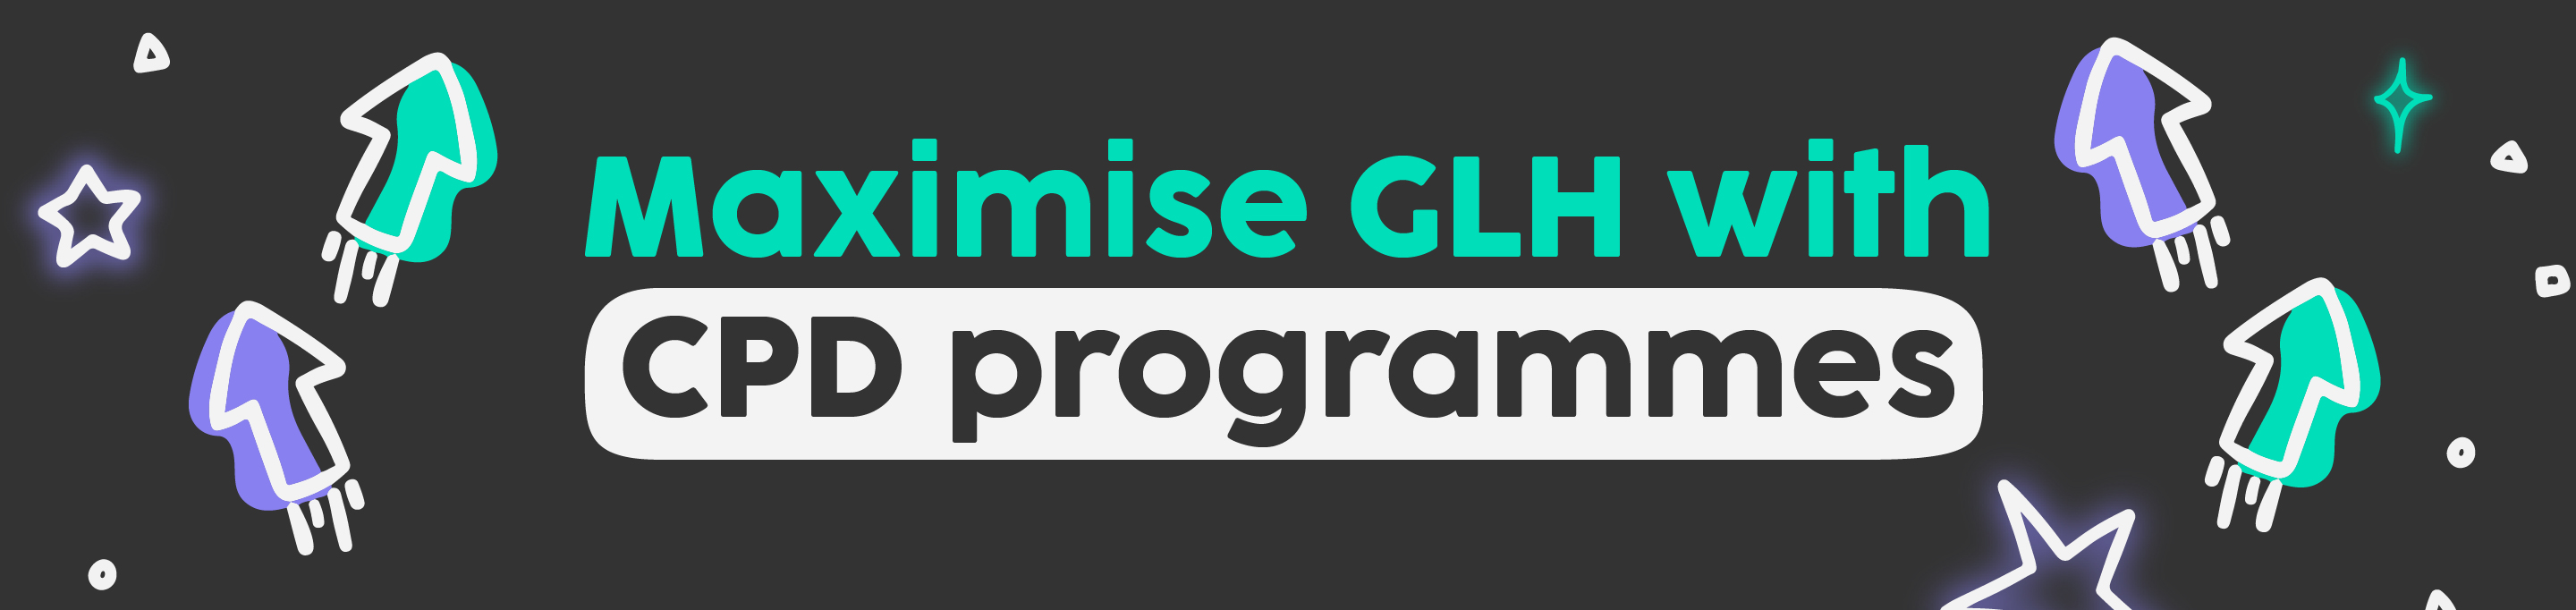 Maximise GLH with CPD programmes